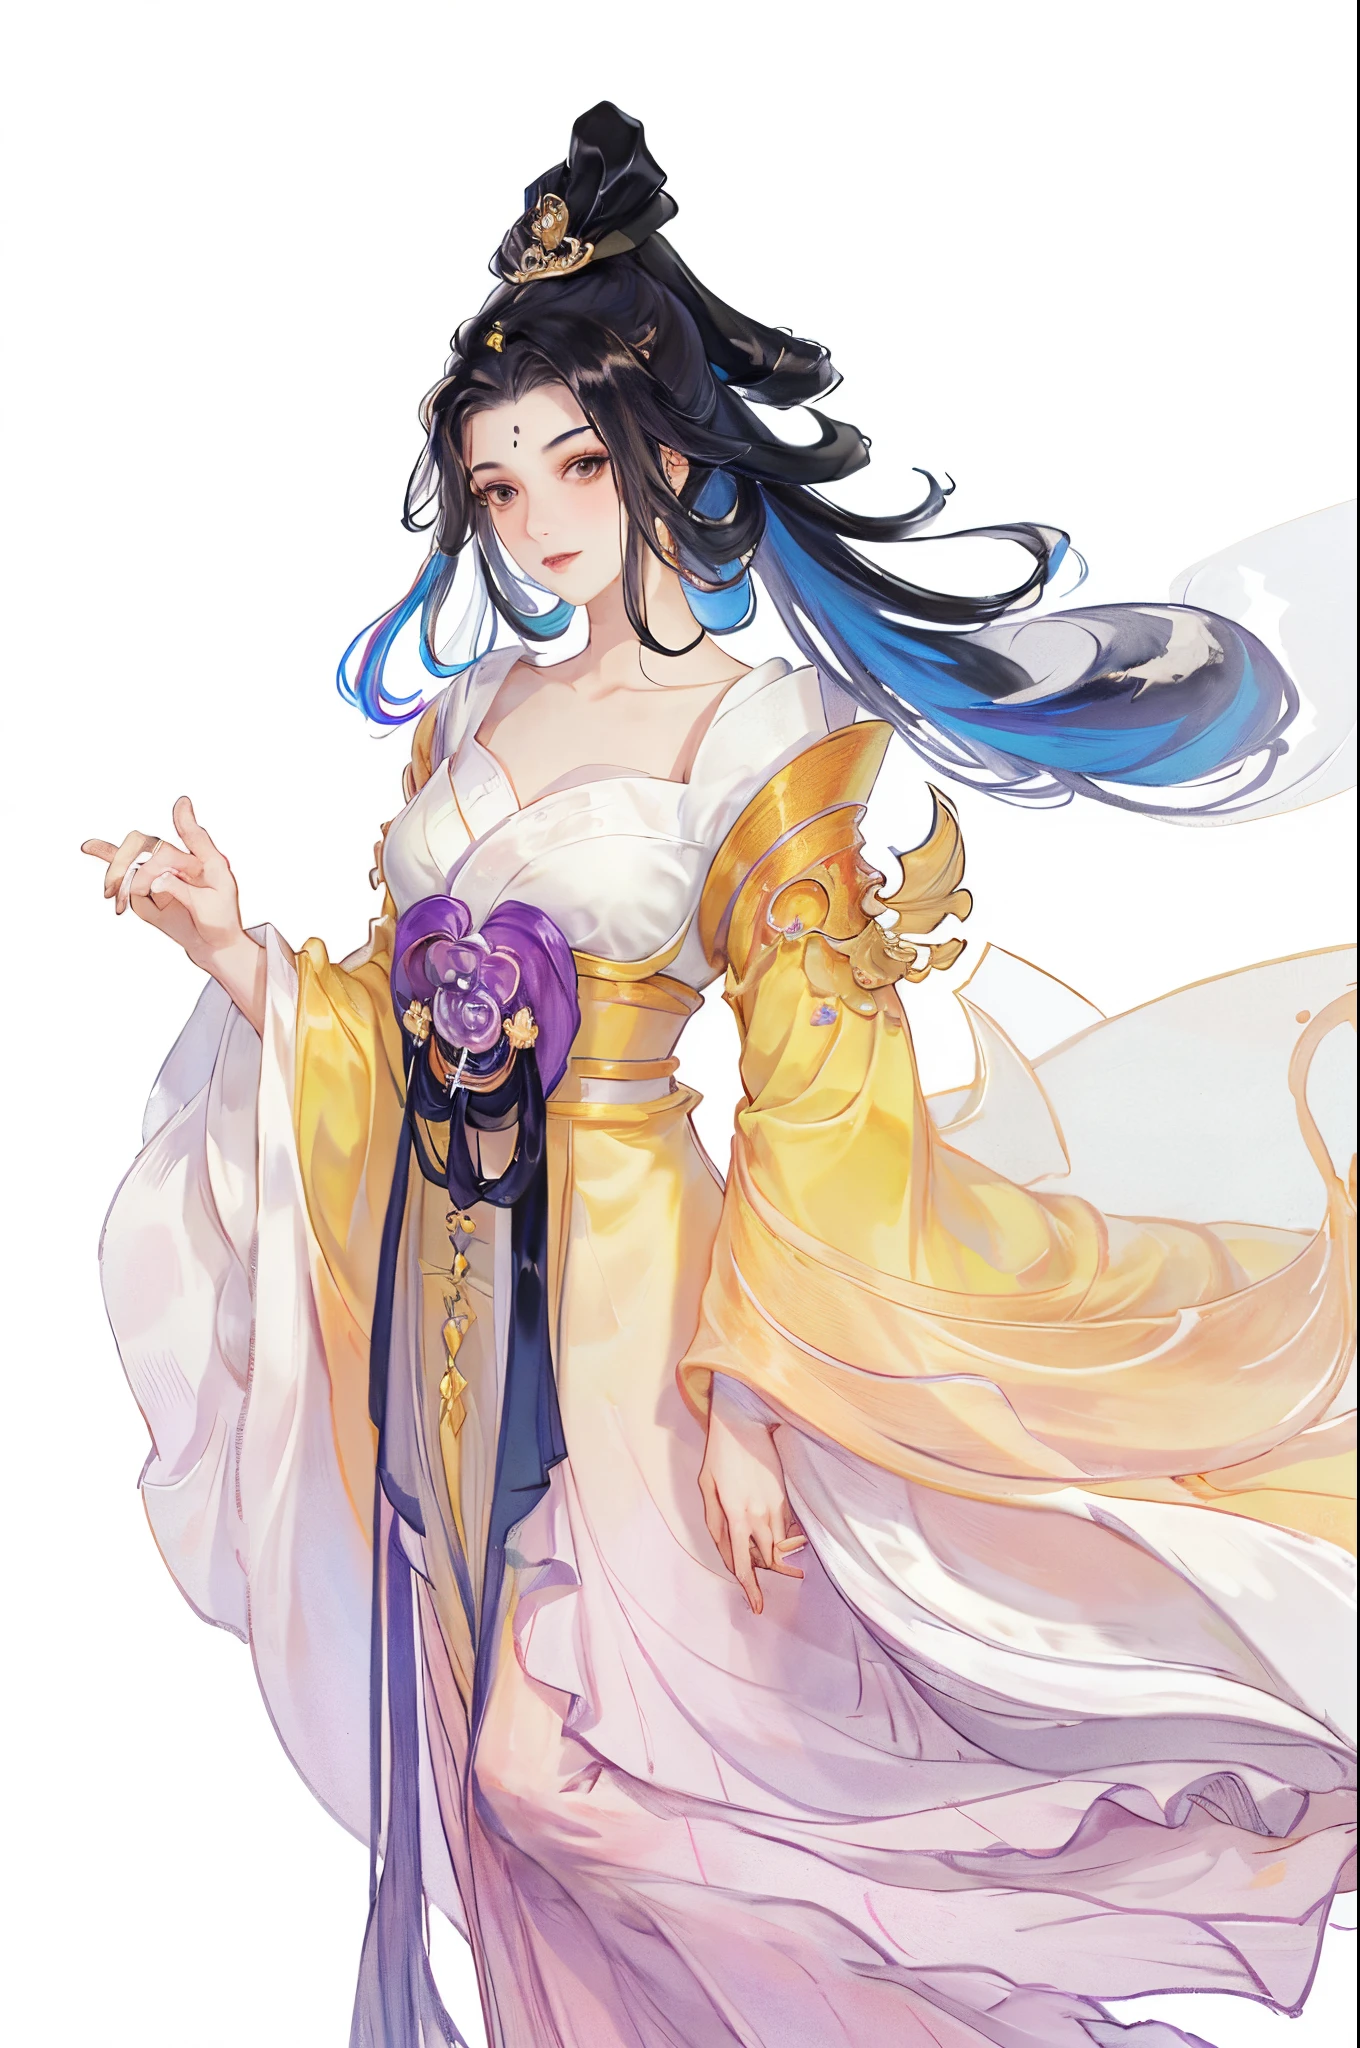 Best quality at best, Ultra-high resolution, (((1 girl))),(Long black hair), game fairy, Old palace, Hanfu, Yarn, Flowing light yarn, jewelry, (focal), (((Colorful))),(sketching:0.8) , tmasterpiece, Best quality at best, beautiful painted, meticulous,(Denoising:0.6), highly  detailed, (tmasterpiece, Best quality at best） CG unified 8K wallpaper，tmasterpiece，Best quality，ultra - detailed）, Super HD picture quality